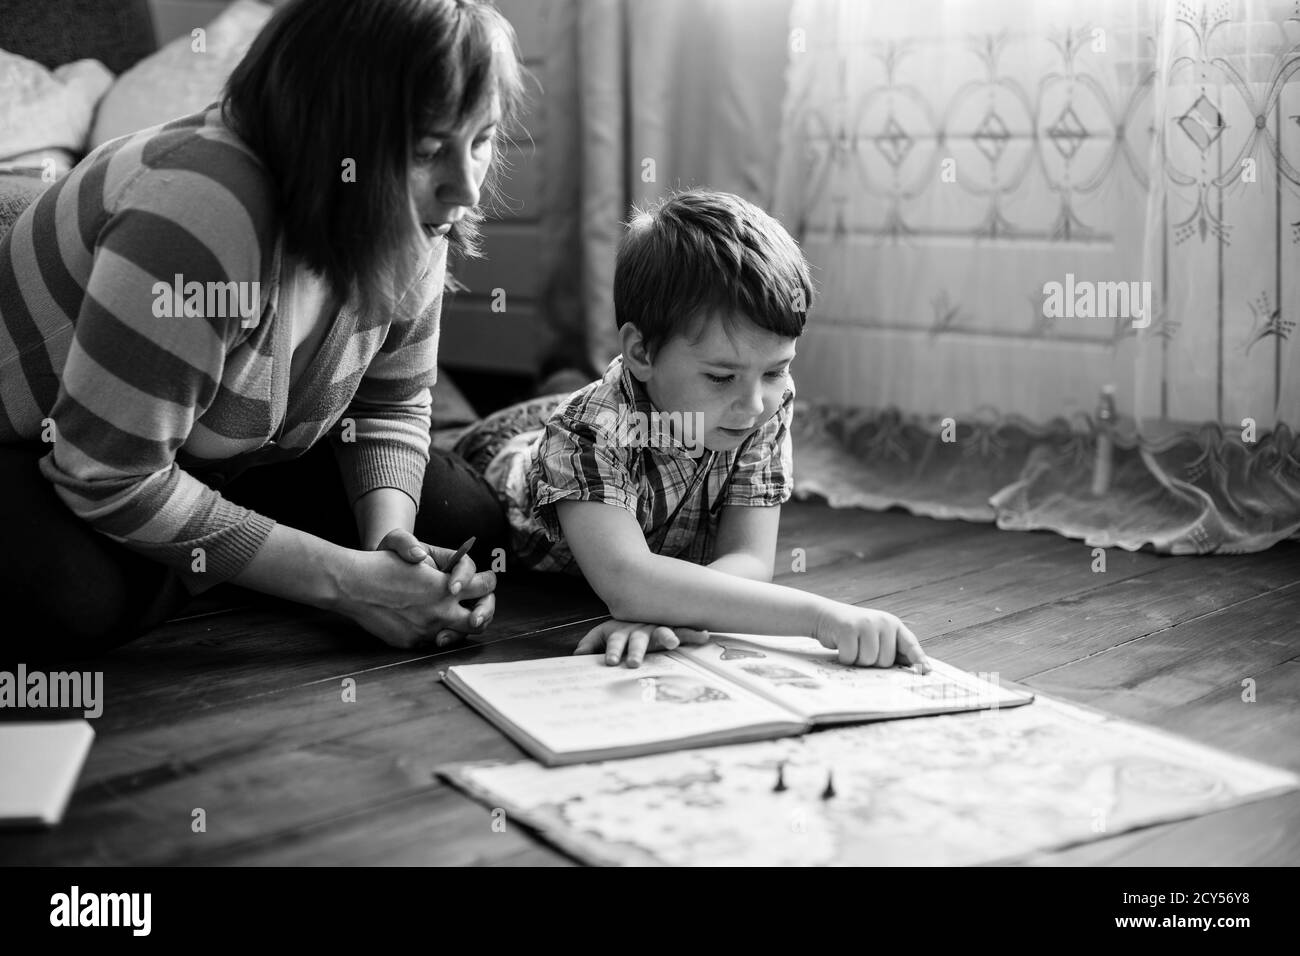 Woman reading a book with her little son sitting on the floor in home. Black and white photo. Stock Photo